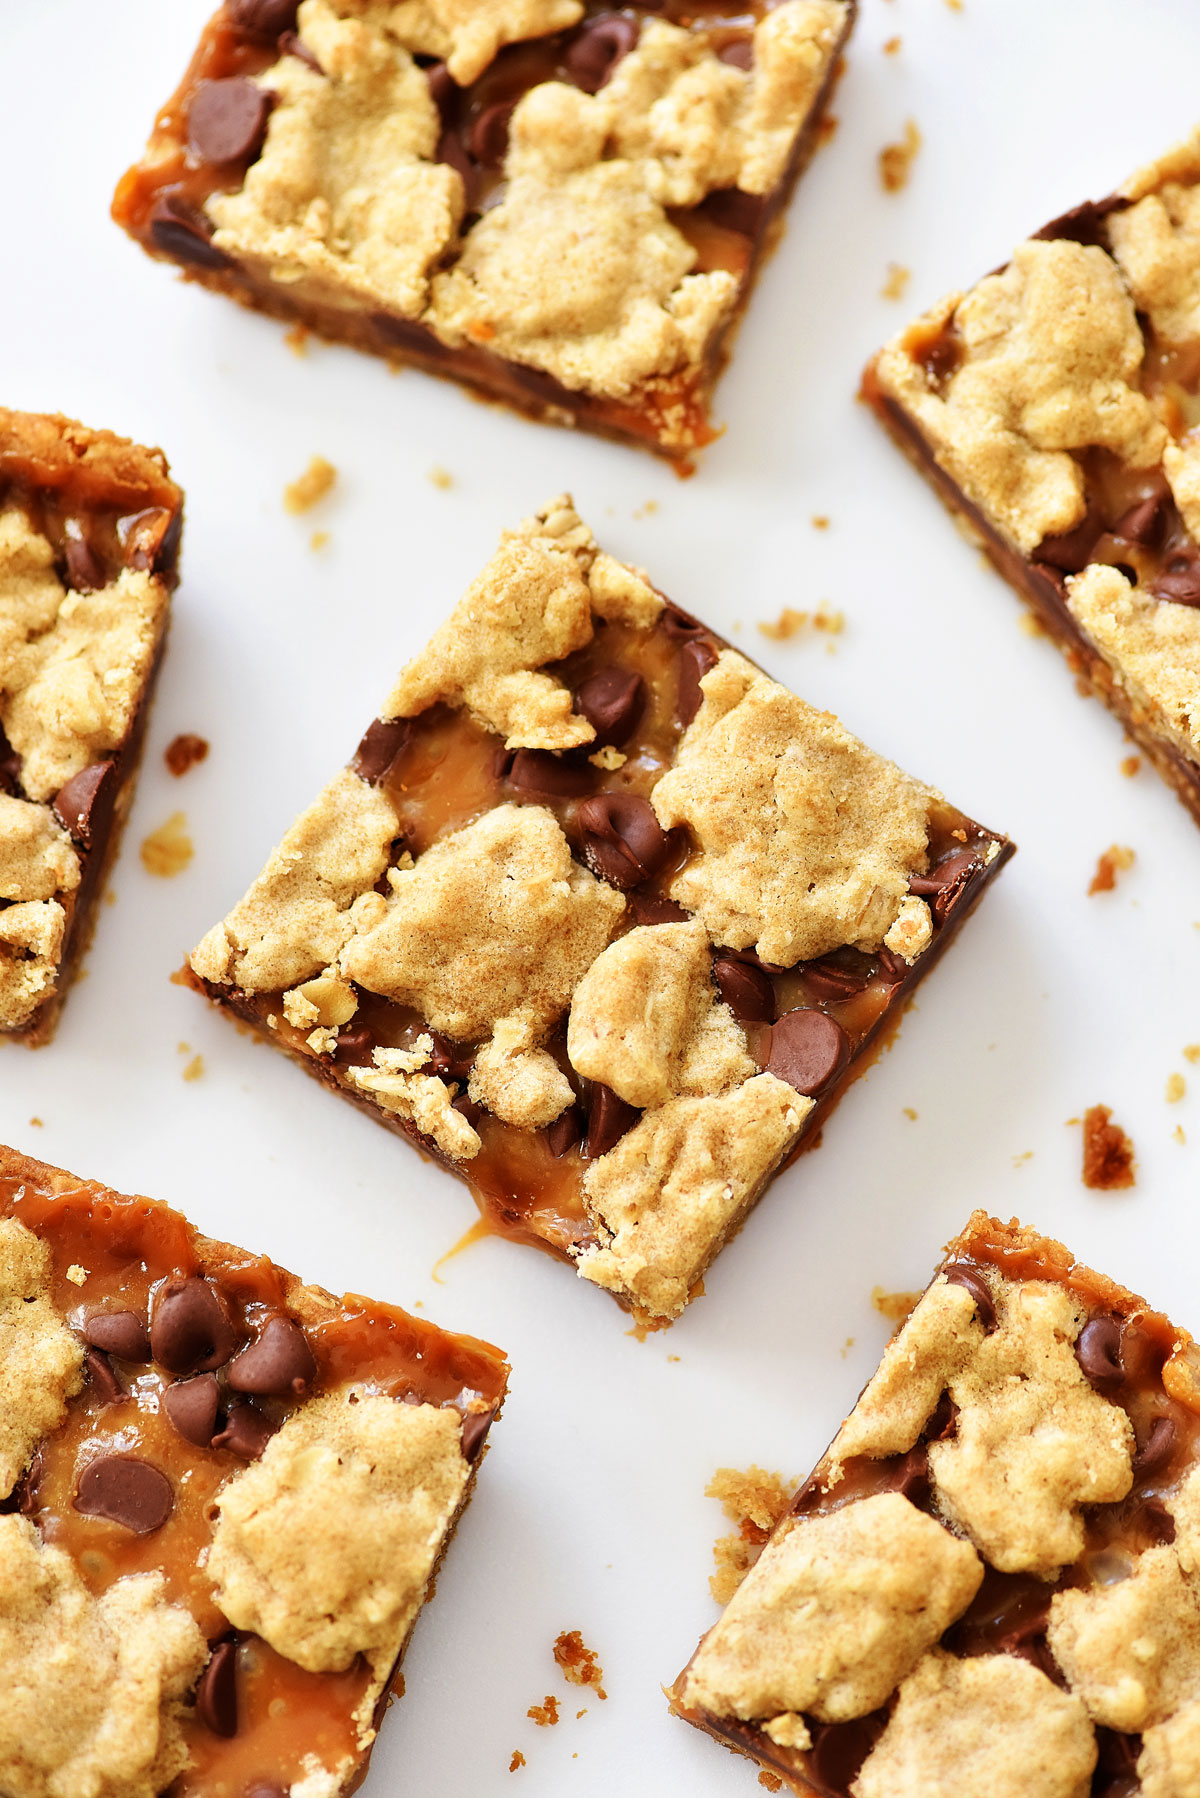 These Binge Bars have an oatmeal cookie crust with chocolate and caramel layers. Life-in-the-Lofthouse.com